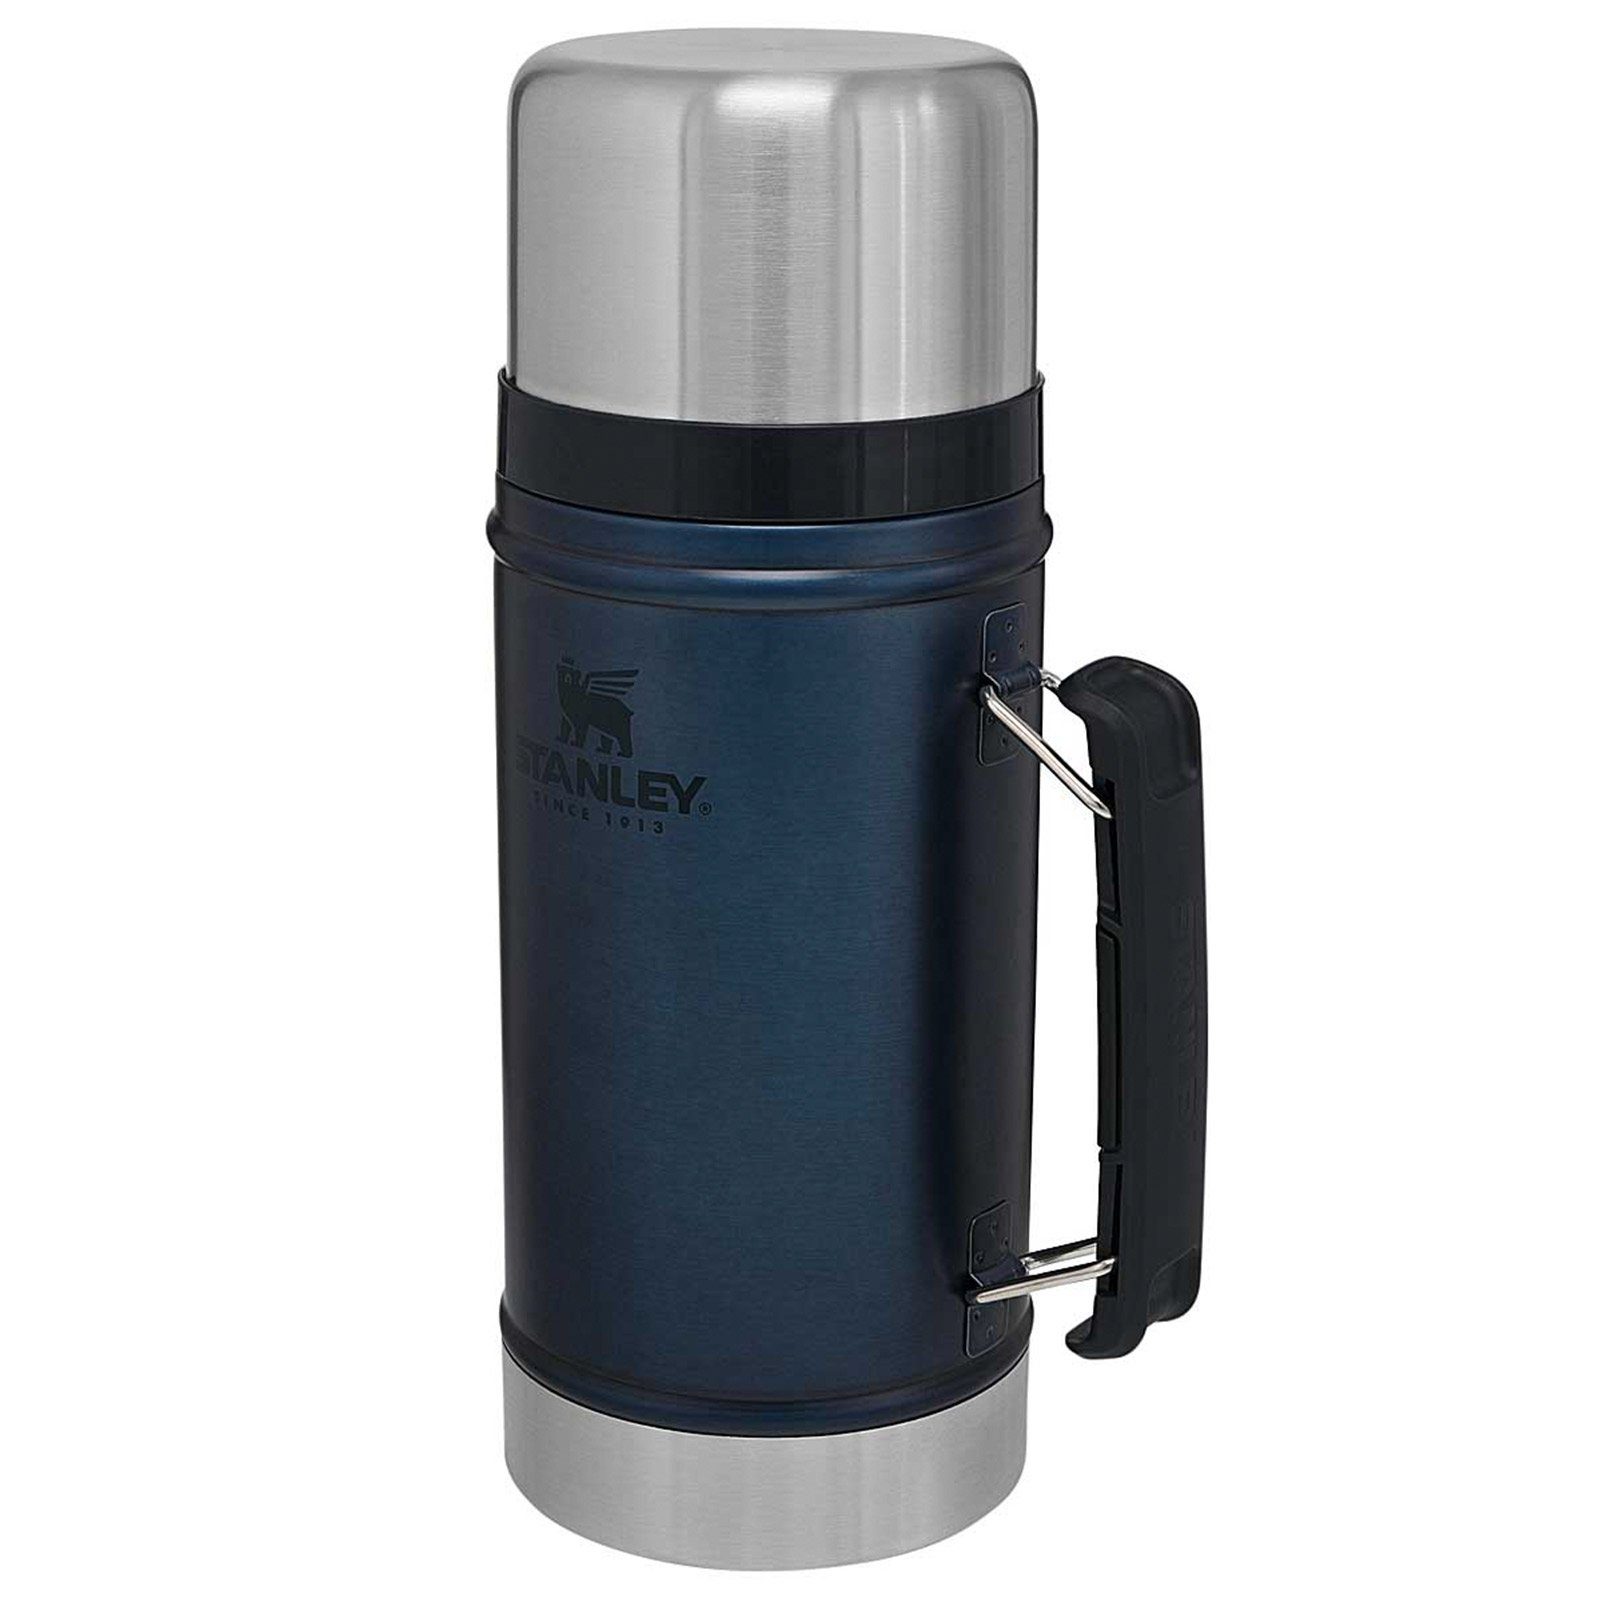 STANLEY Thermobehälter Classic Isolierbehälter Essen Thermo, Edelstahl 18/8, Food Behälter Container Griff 0,94L Blau